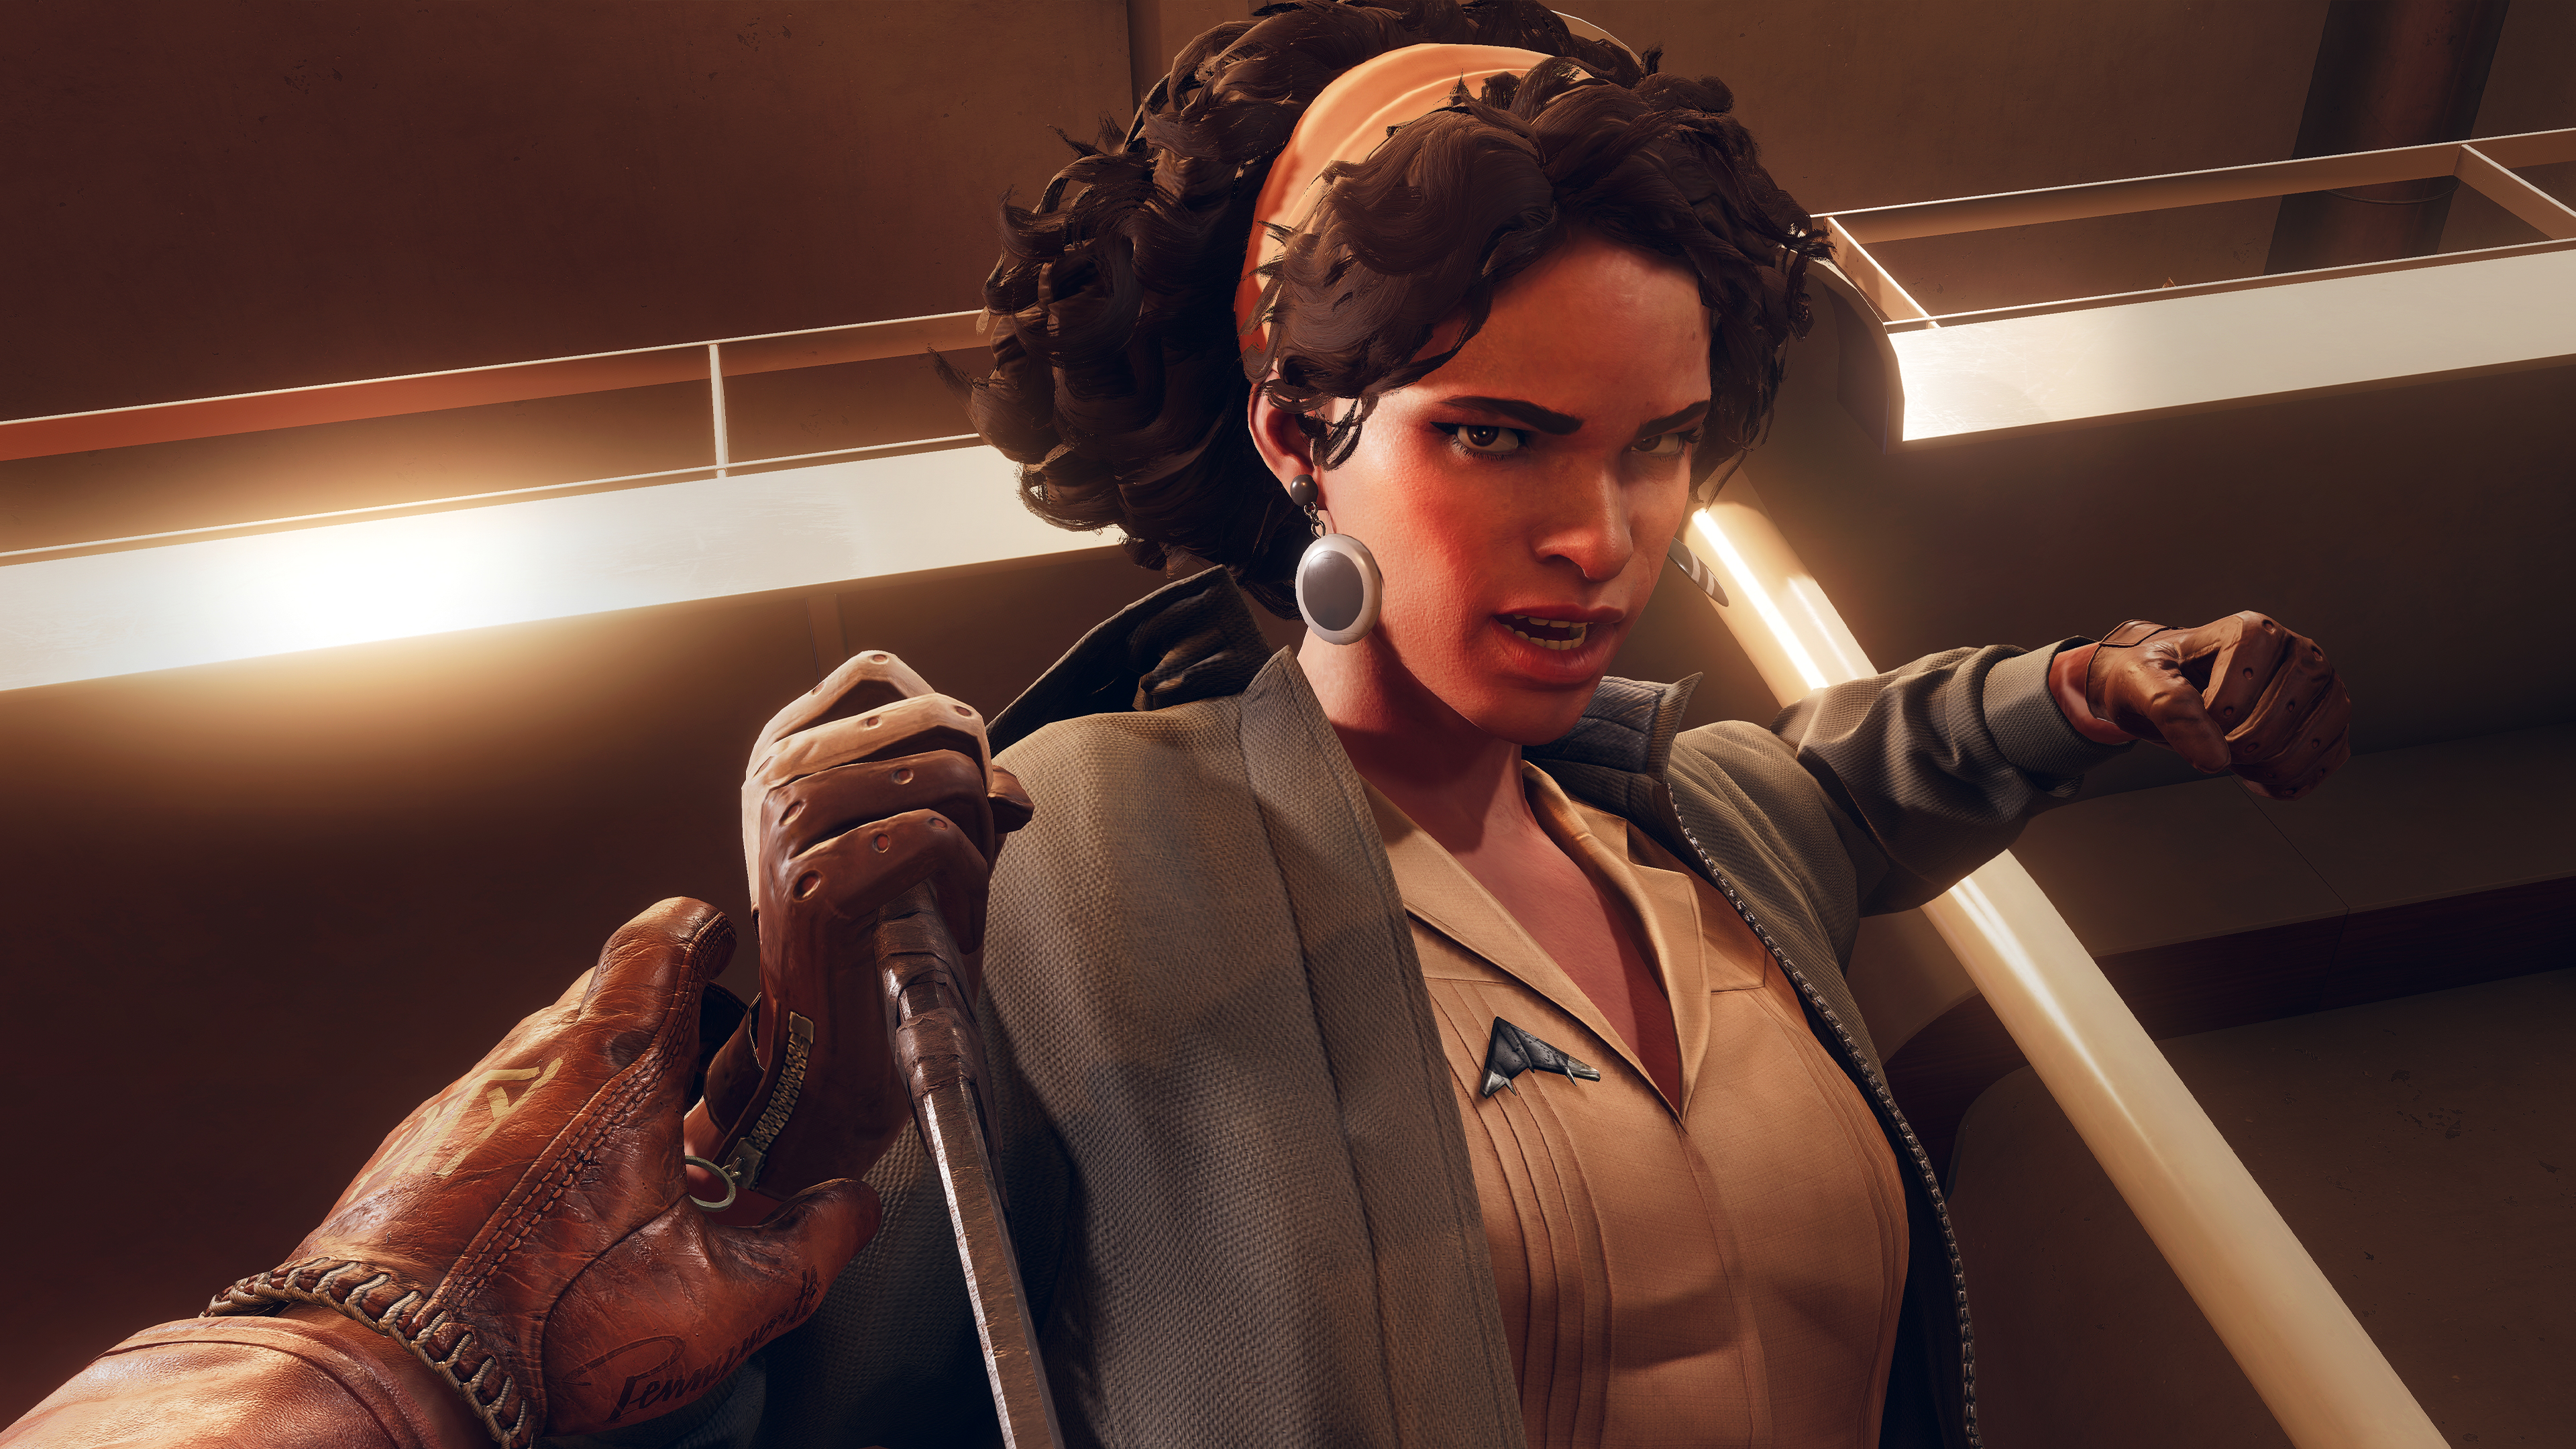  Deathloop system requirements demands an RTX 2060 for 60 fps 